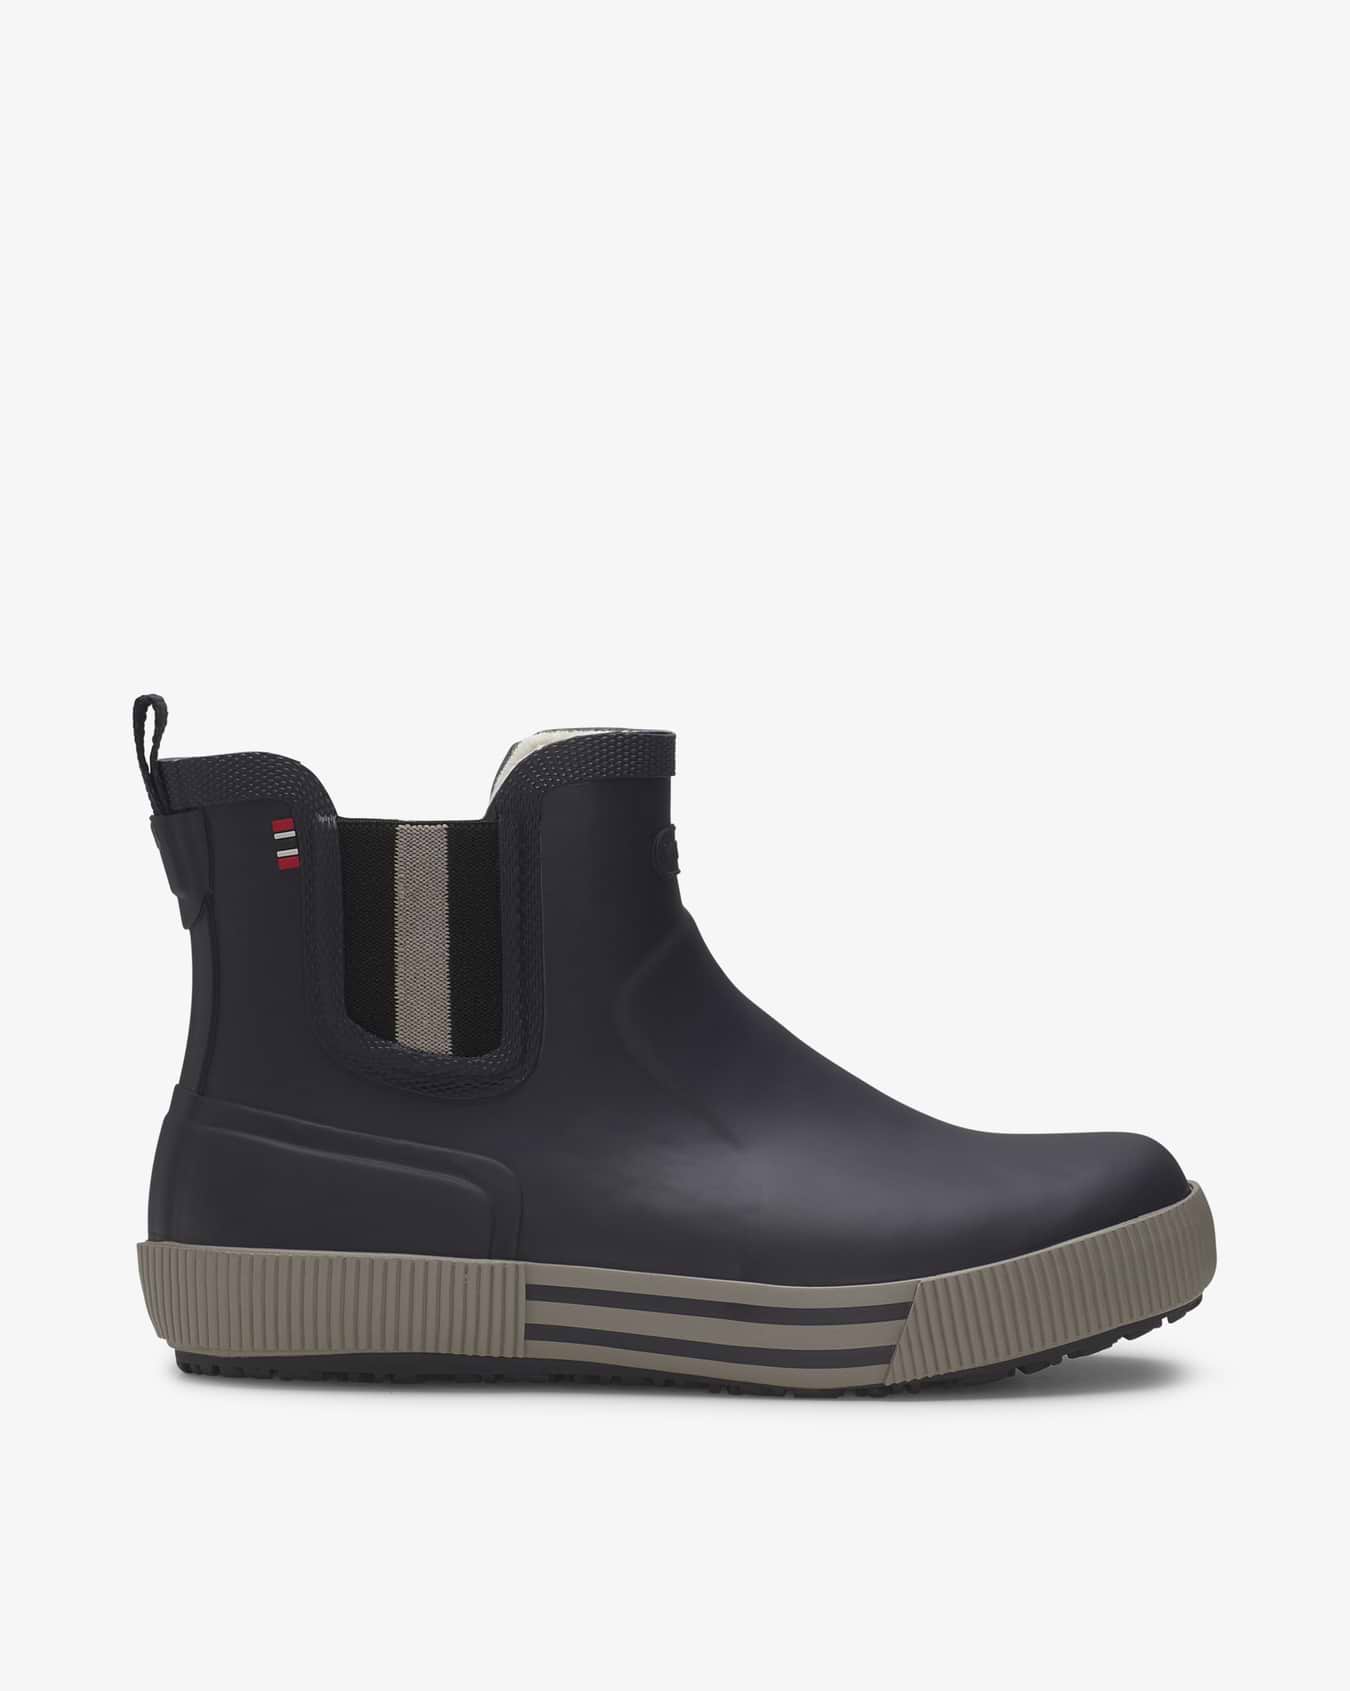 Stavern Navy/Pearlgrey Rubber Boot